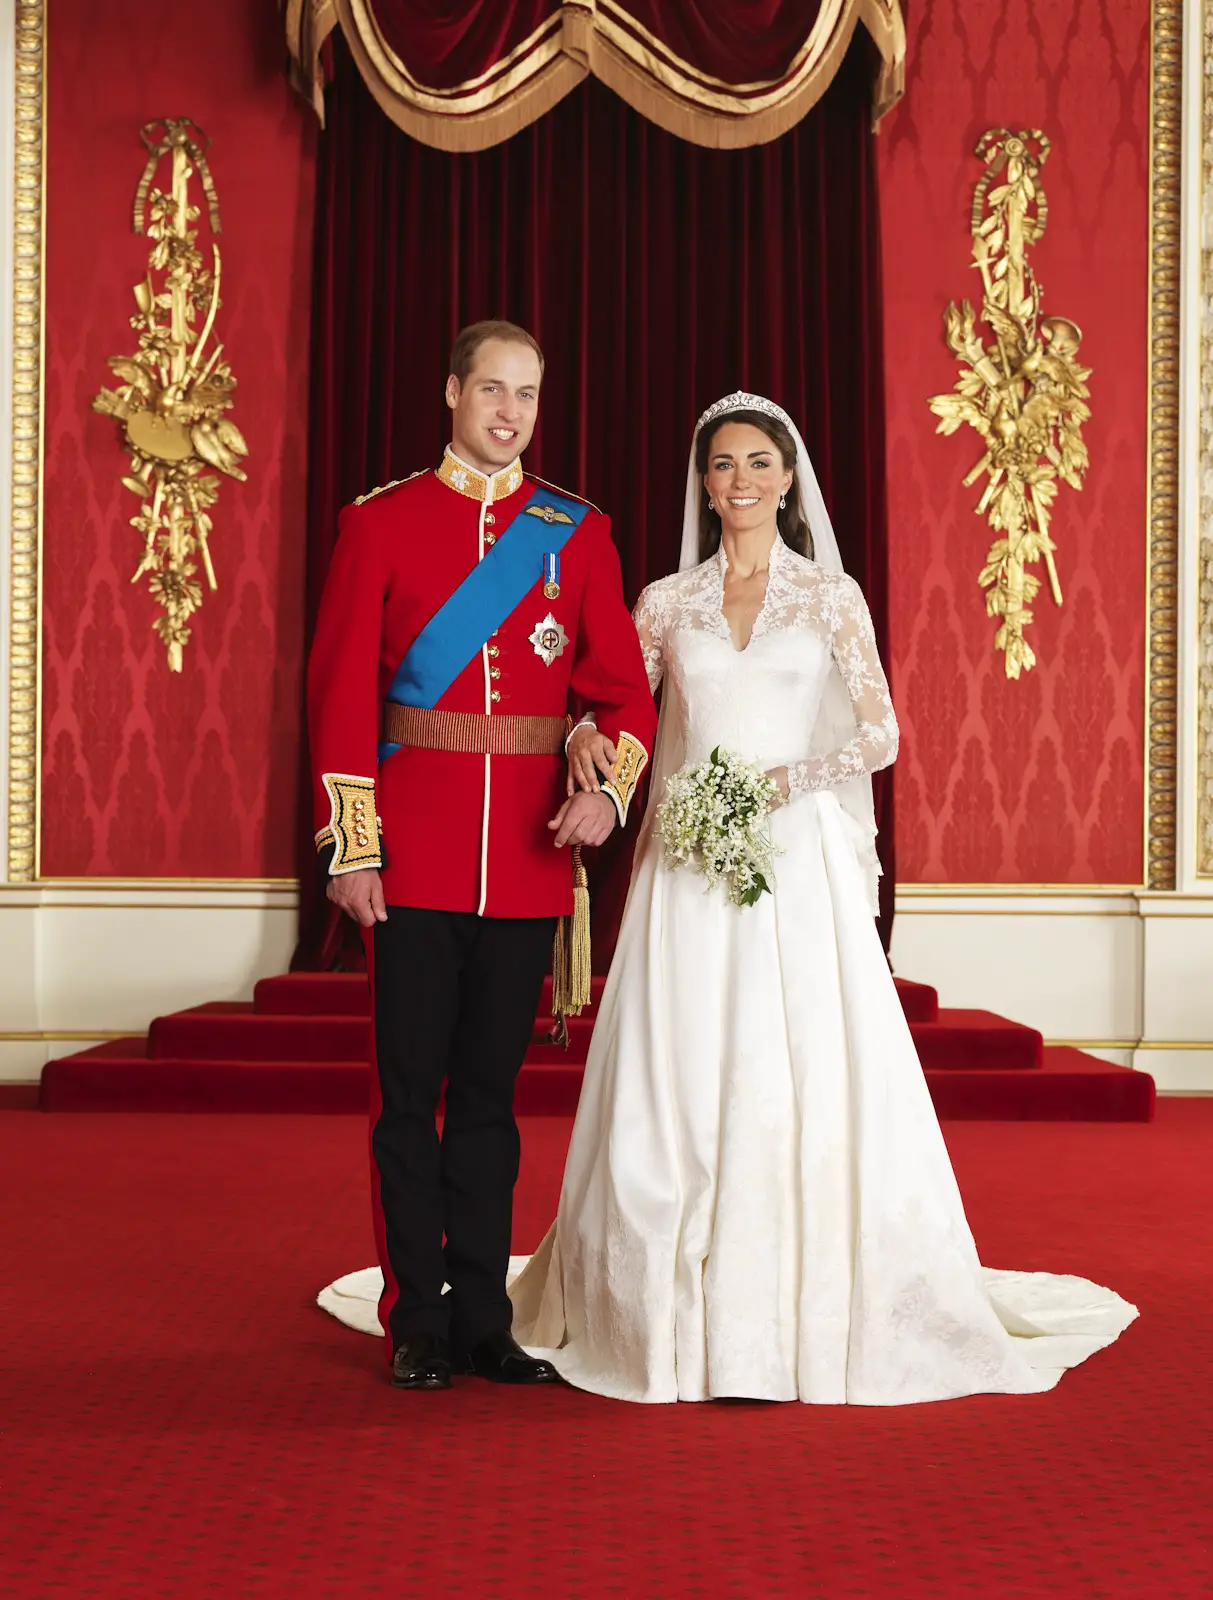 The Royal Wedding at Buckingham Palace on 29th April 2011: The Bride and Groom, TRH The Duke and Duchess of Cambridge in the Throne Room. Picture Credit: Photograph by Hugo Burnand